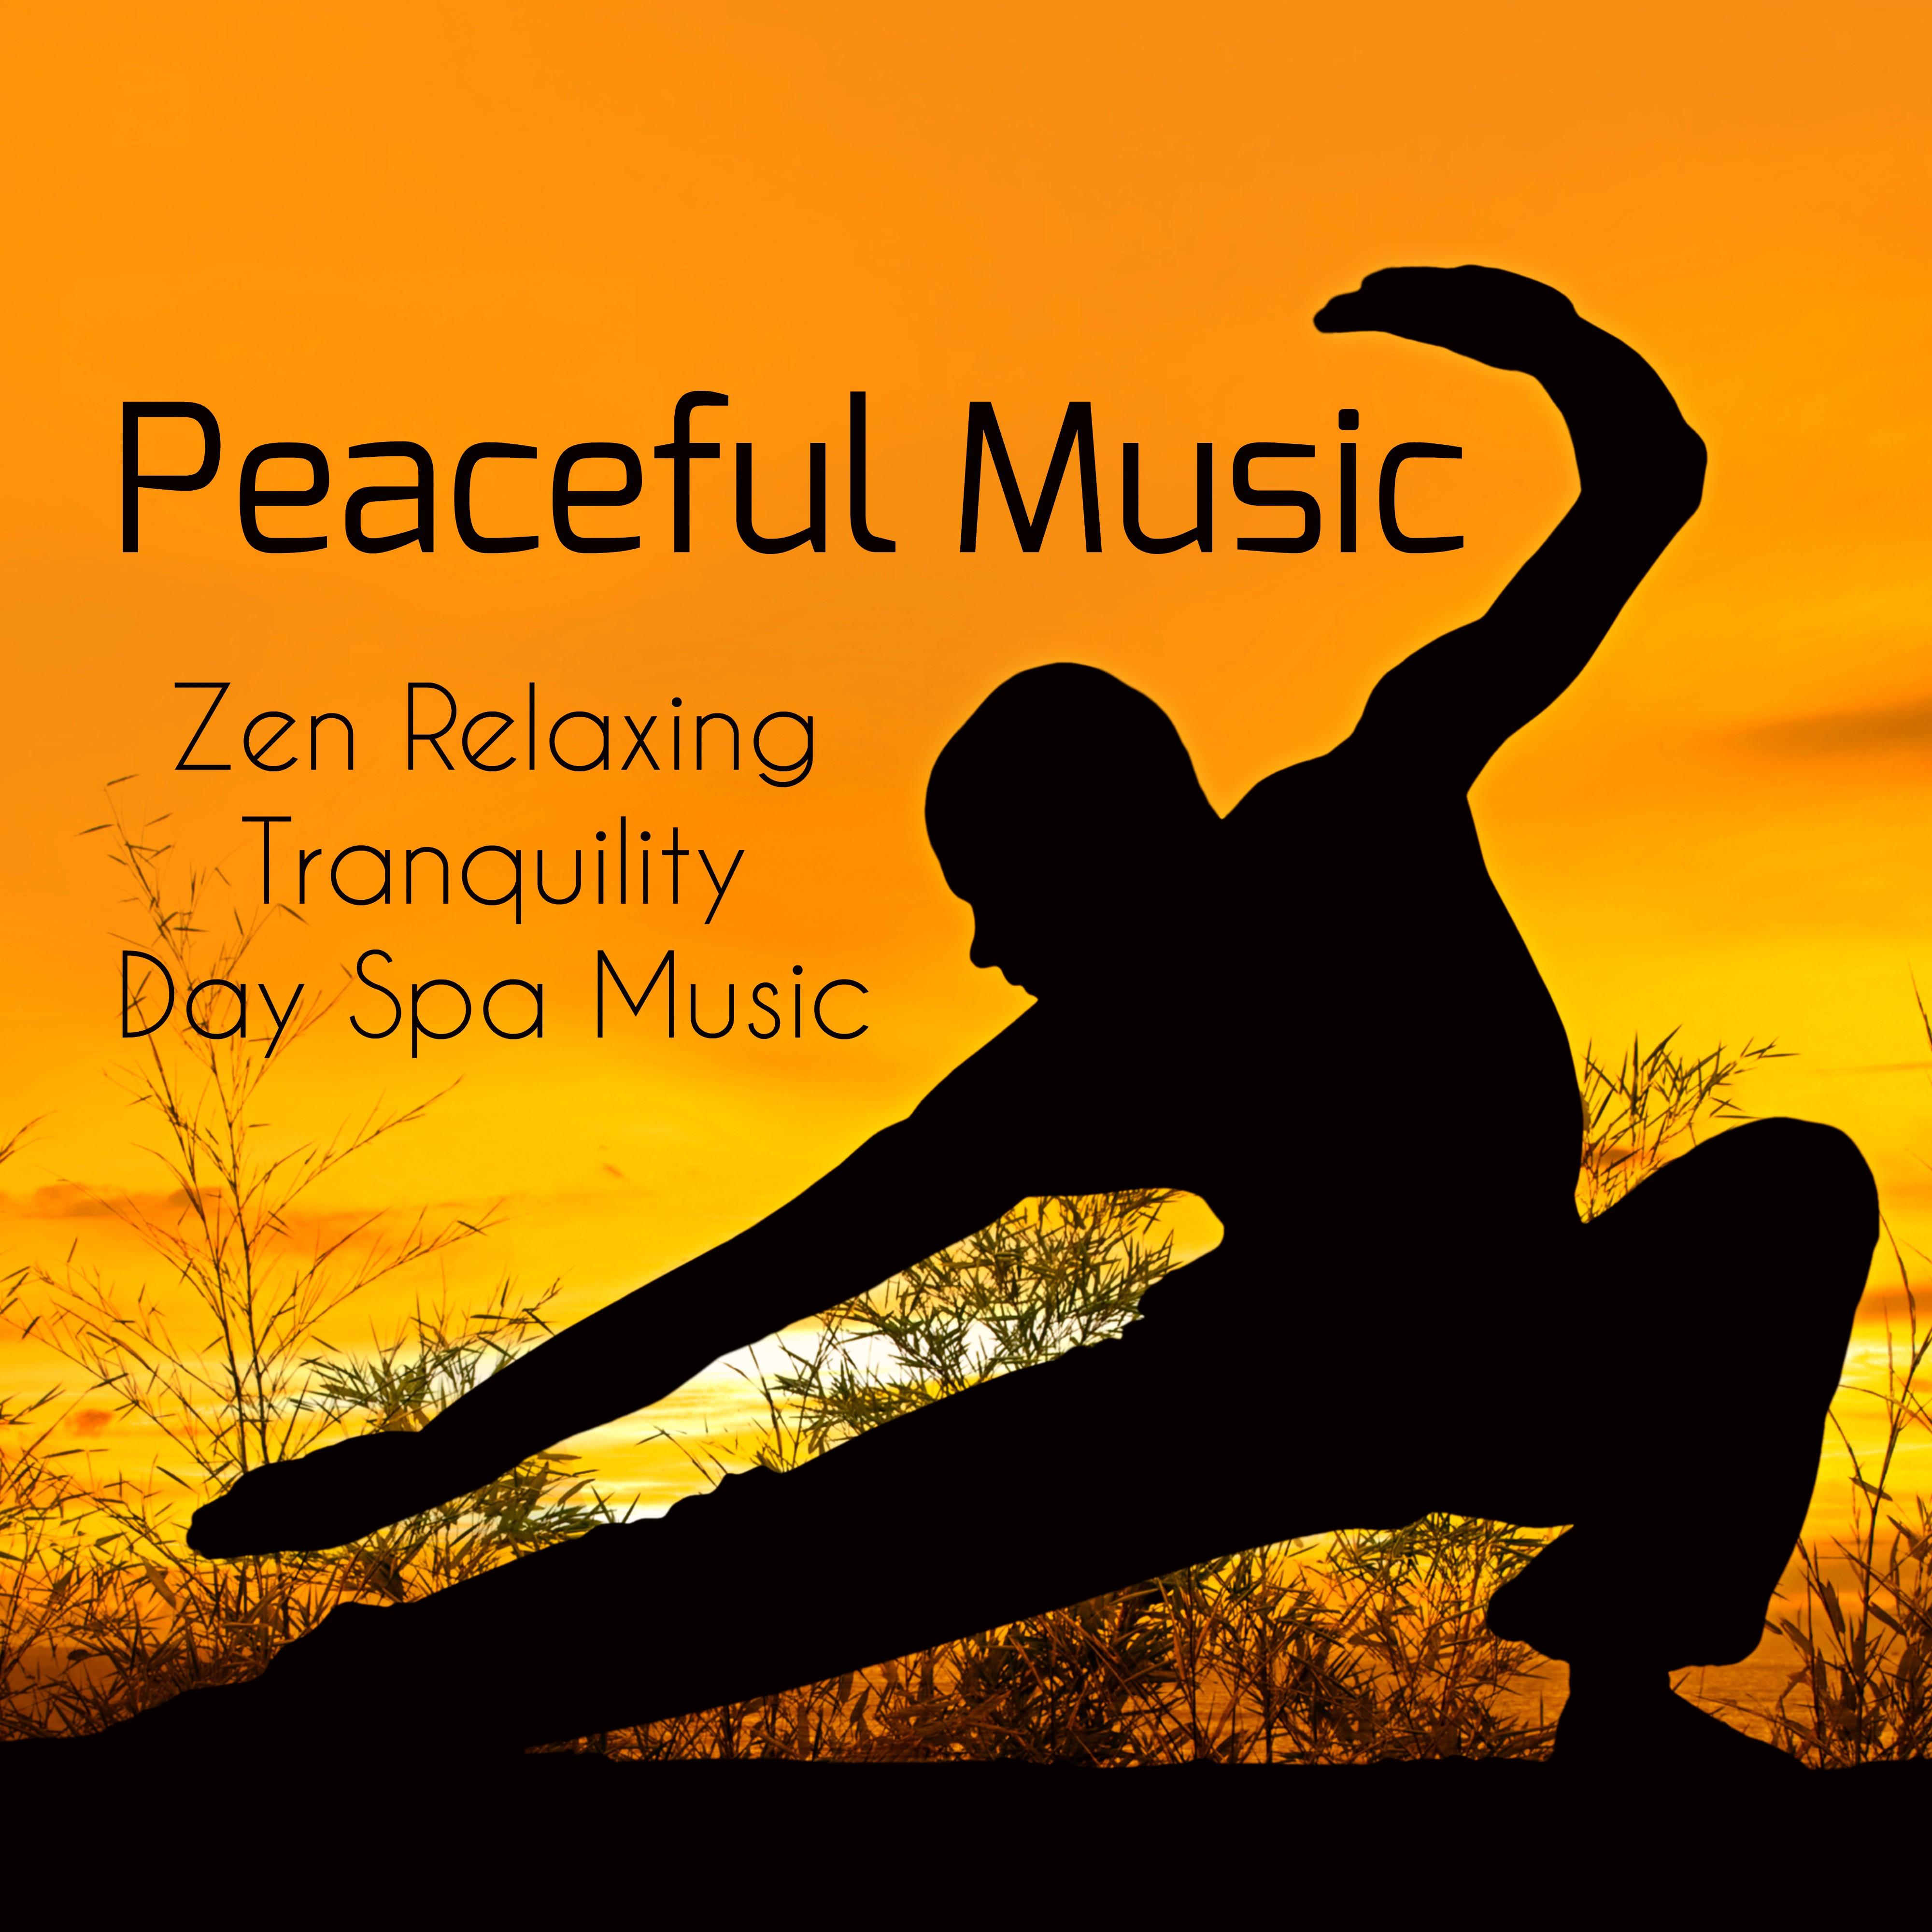 Peaceful Music - Zen Relaxing Garden Tranquility Day Spa Music with Natural Instrumental Healing Sounds